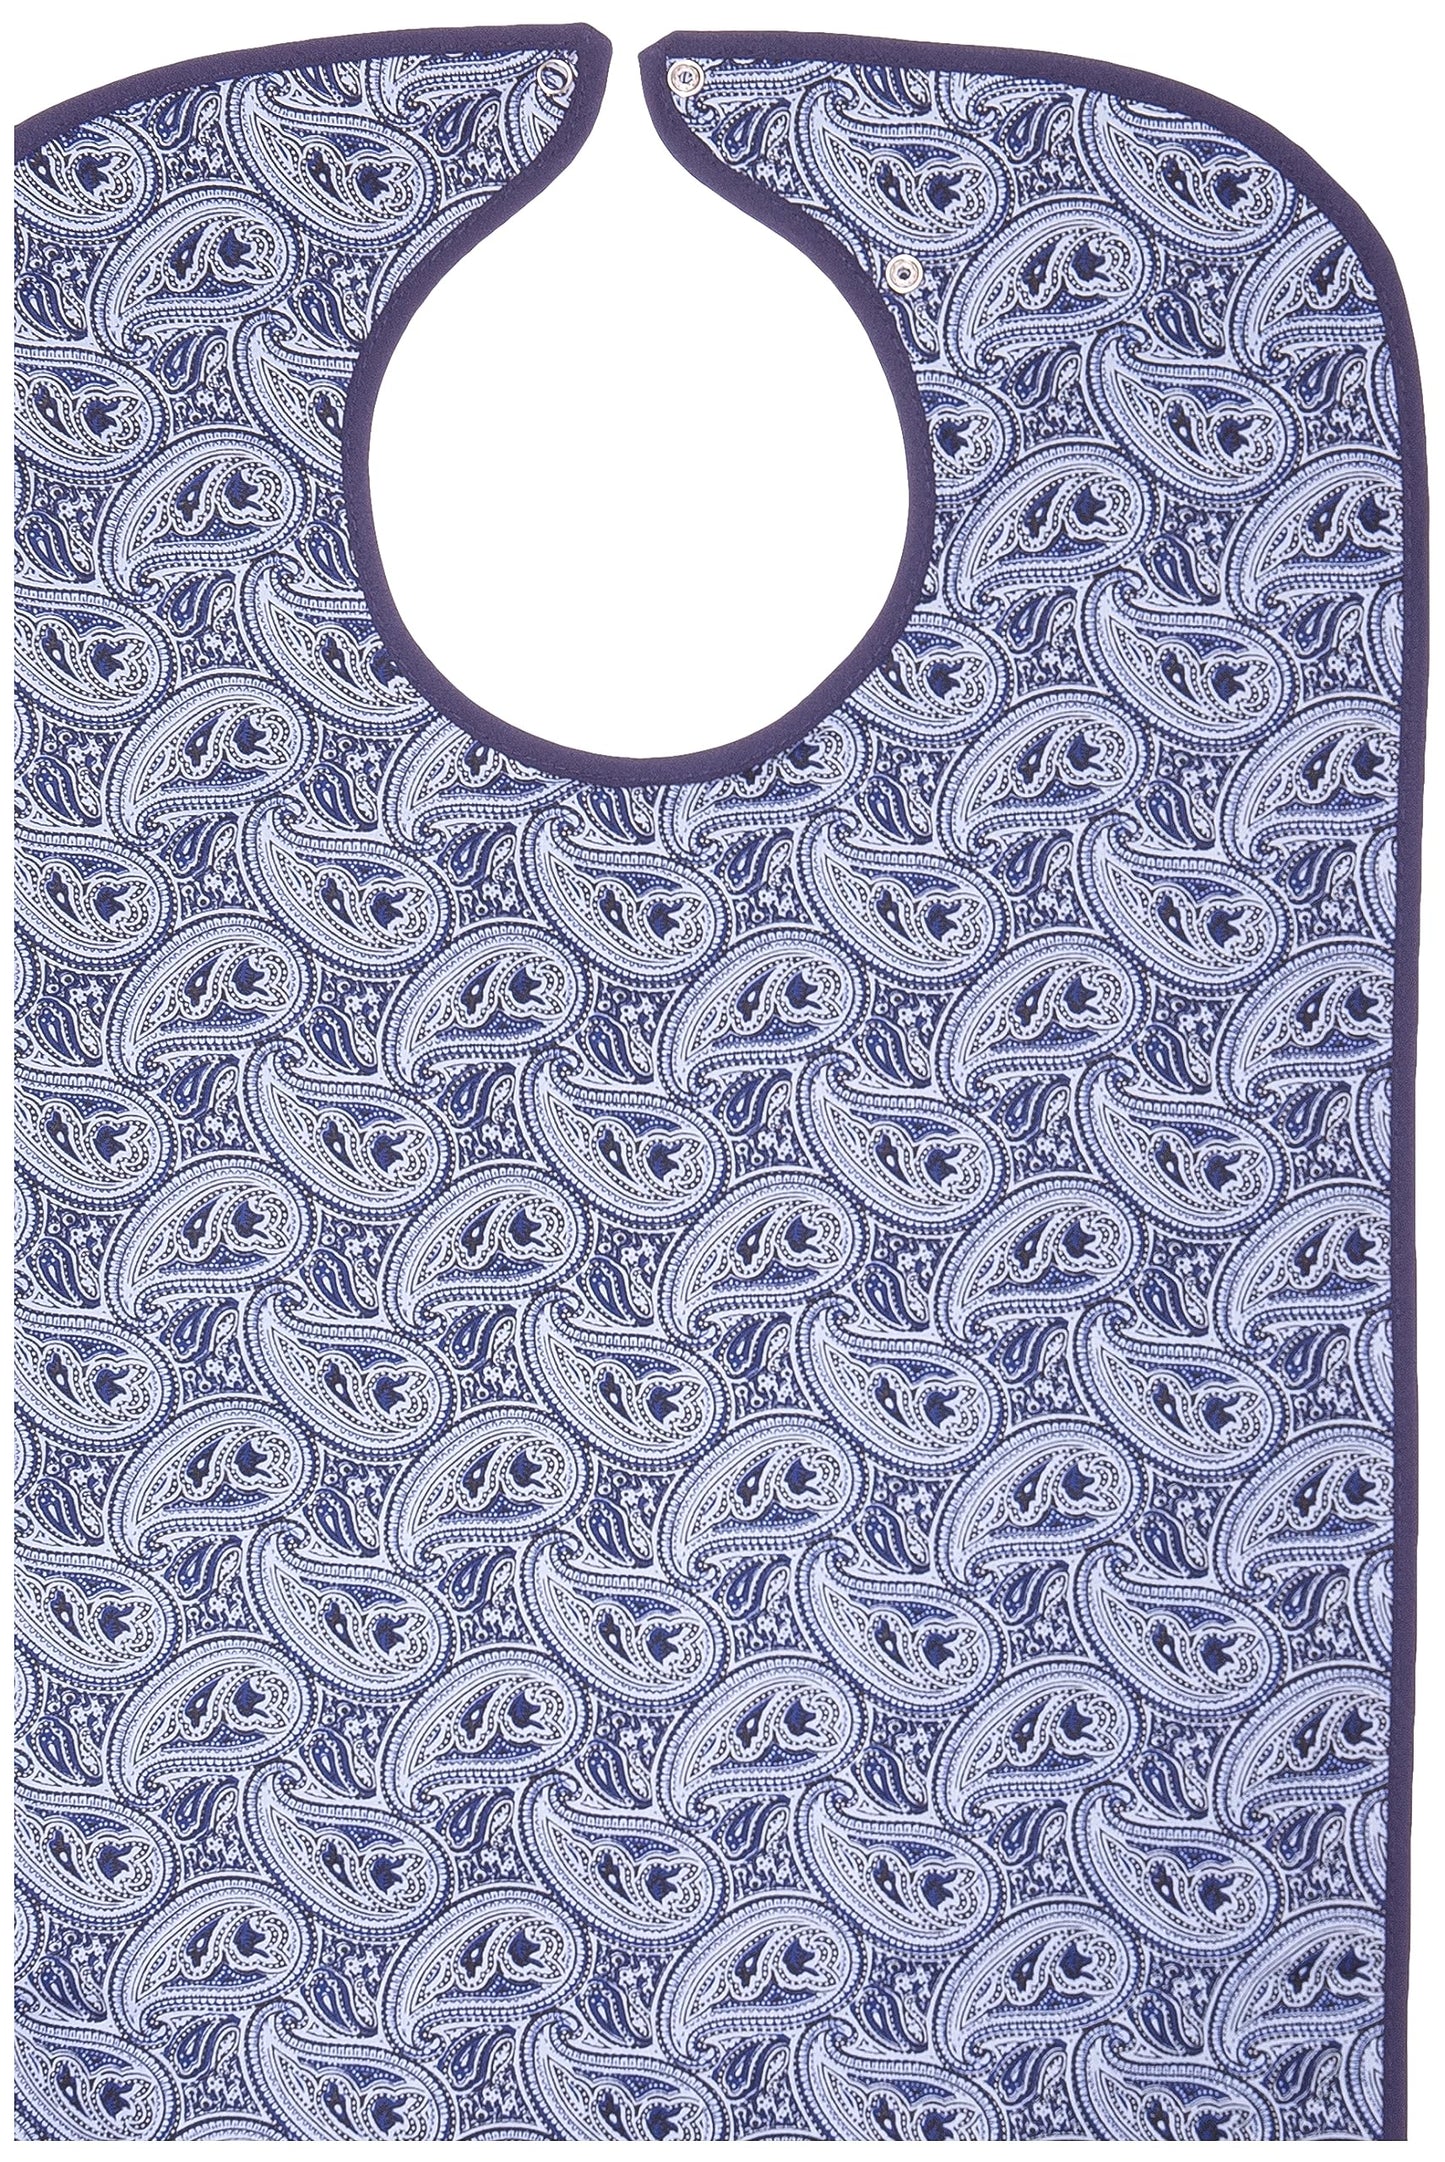 Priva Extra Long Paisley Waterproof Mealtime Protector Adult Bib 18" x 35", with vinyl protective backing and Adjustable Snap Closure